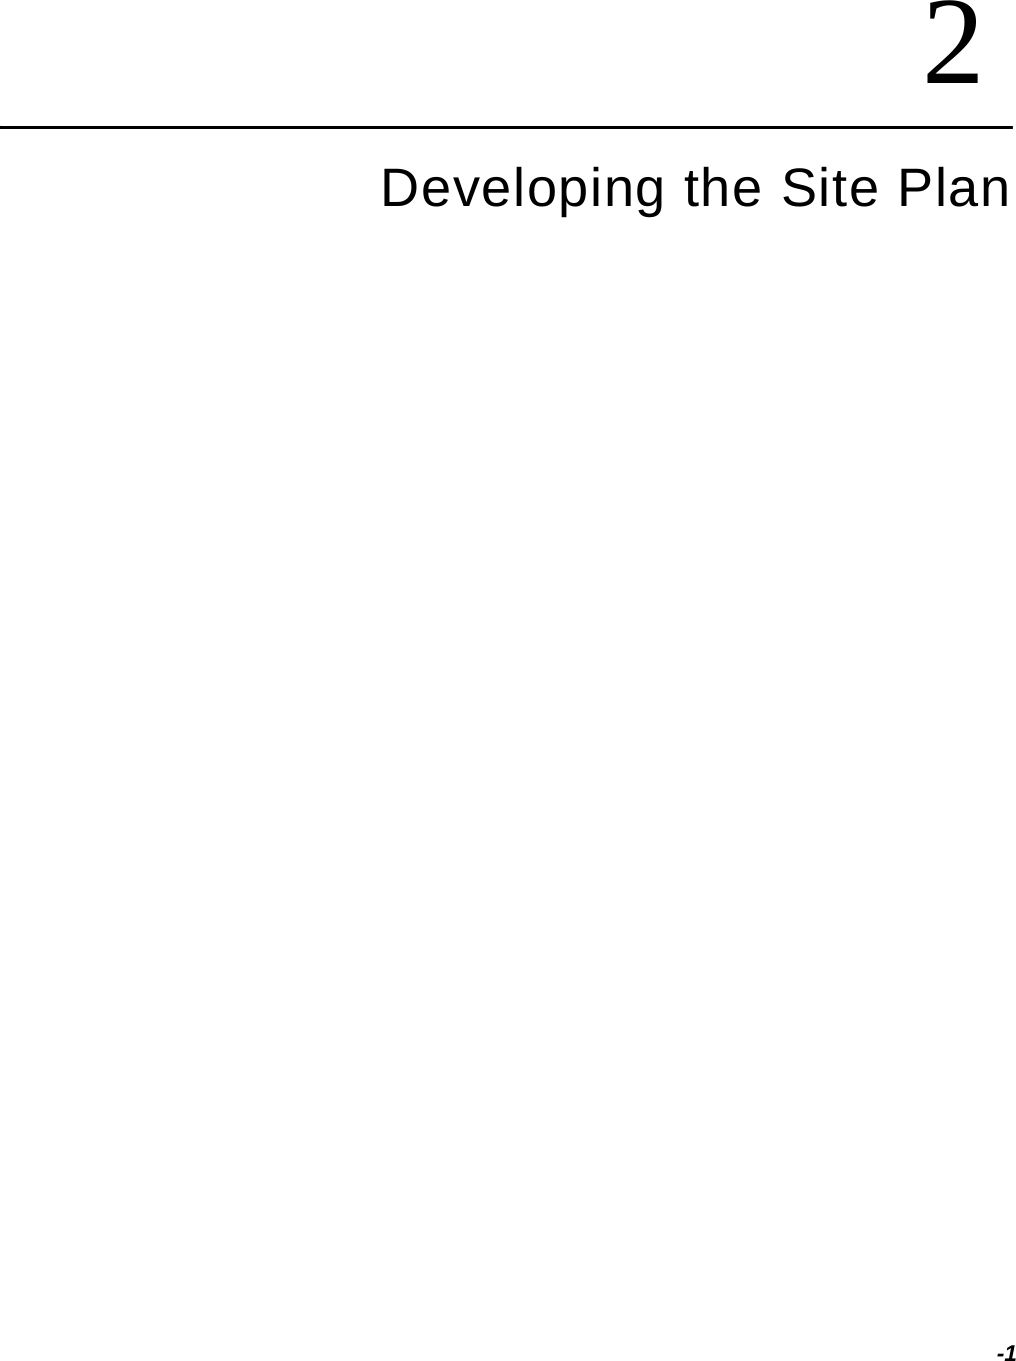 -12Developing the Site Plan